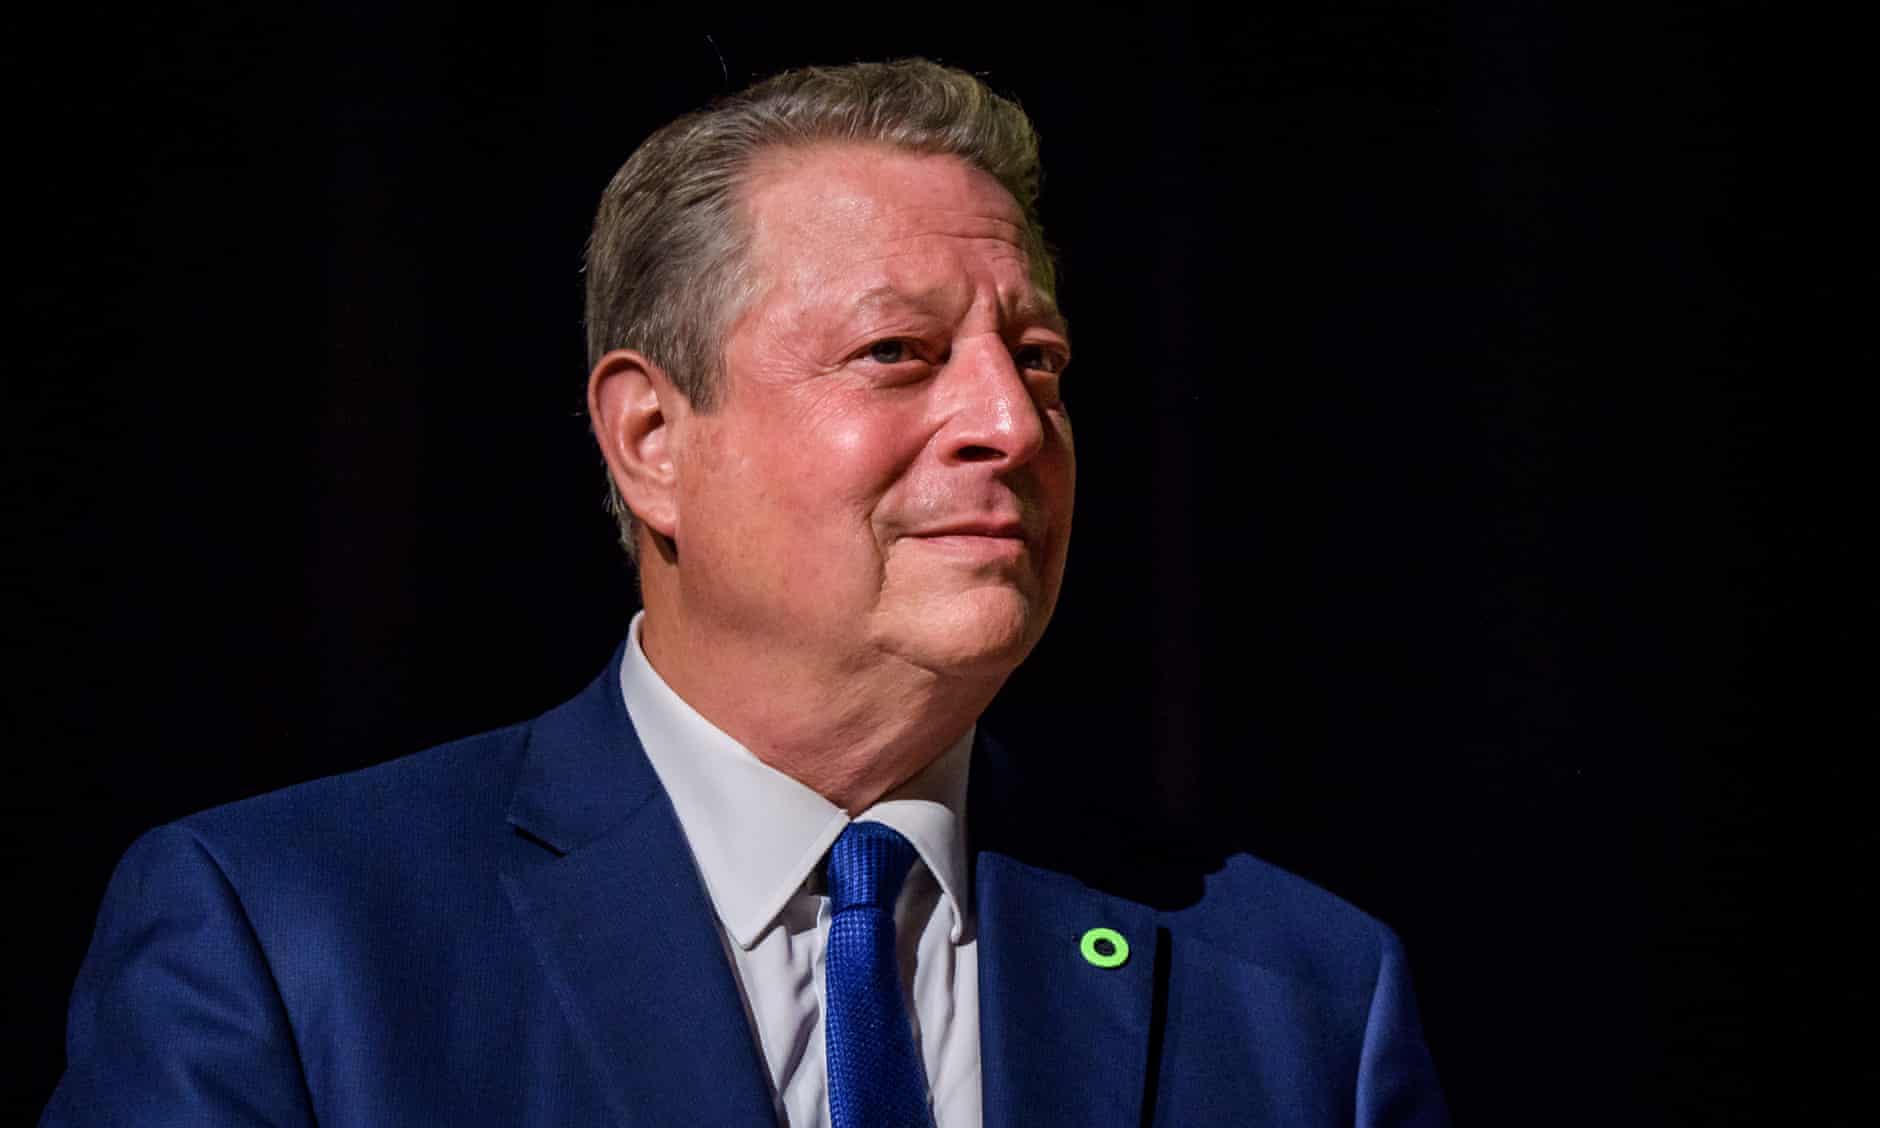 Al Gore hails Biden’s historic climate bill as ‘a critical turning point’ (theguardian.com)